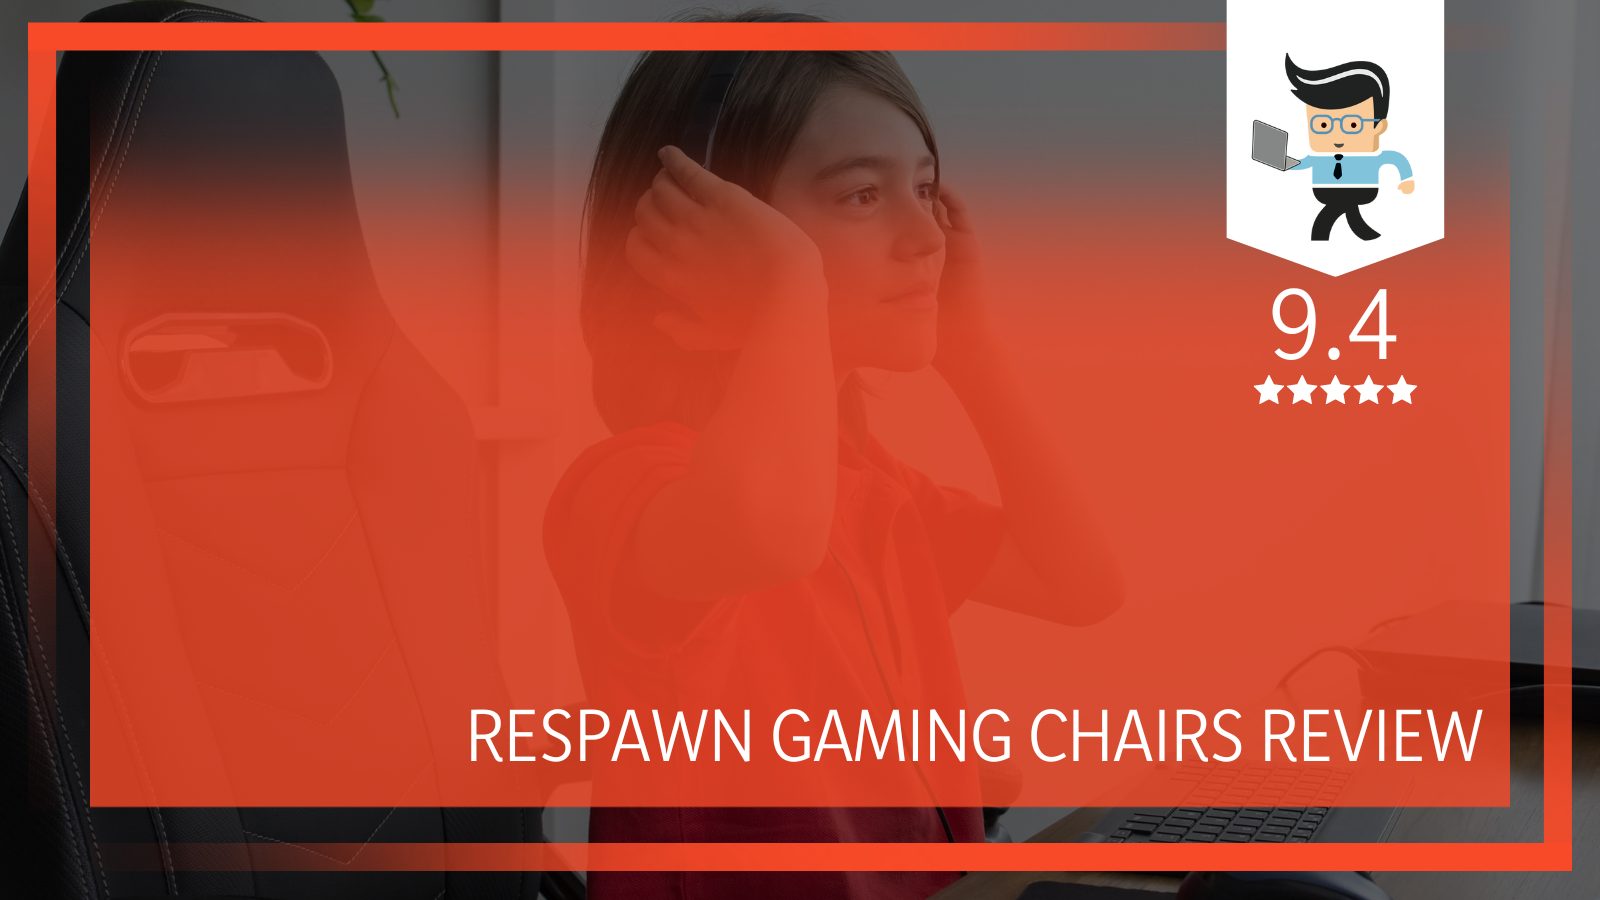 Respawn gaming chairs review